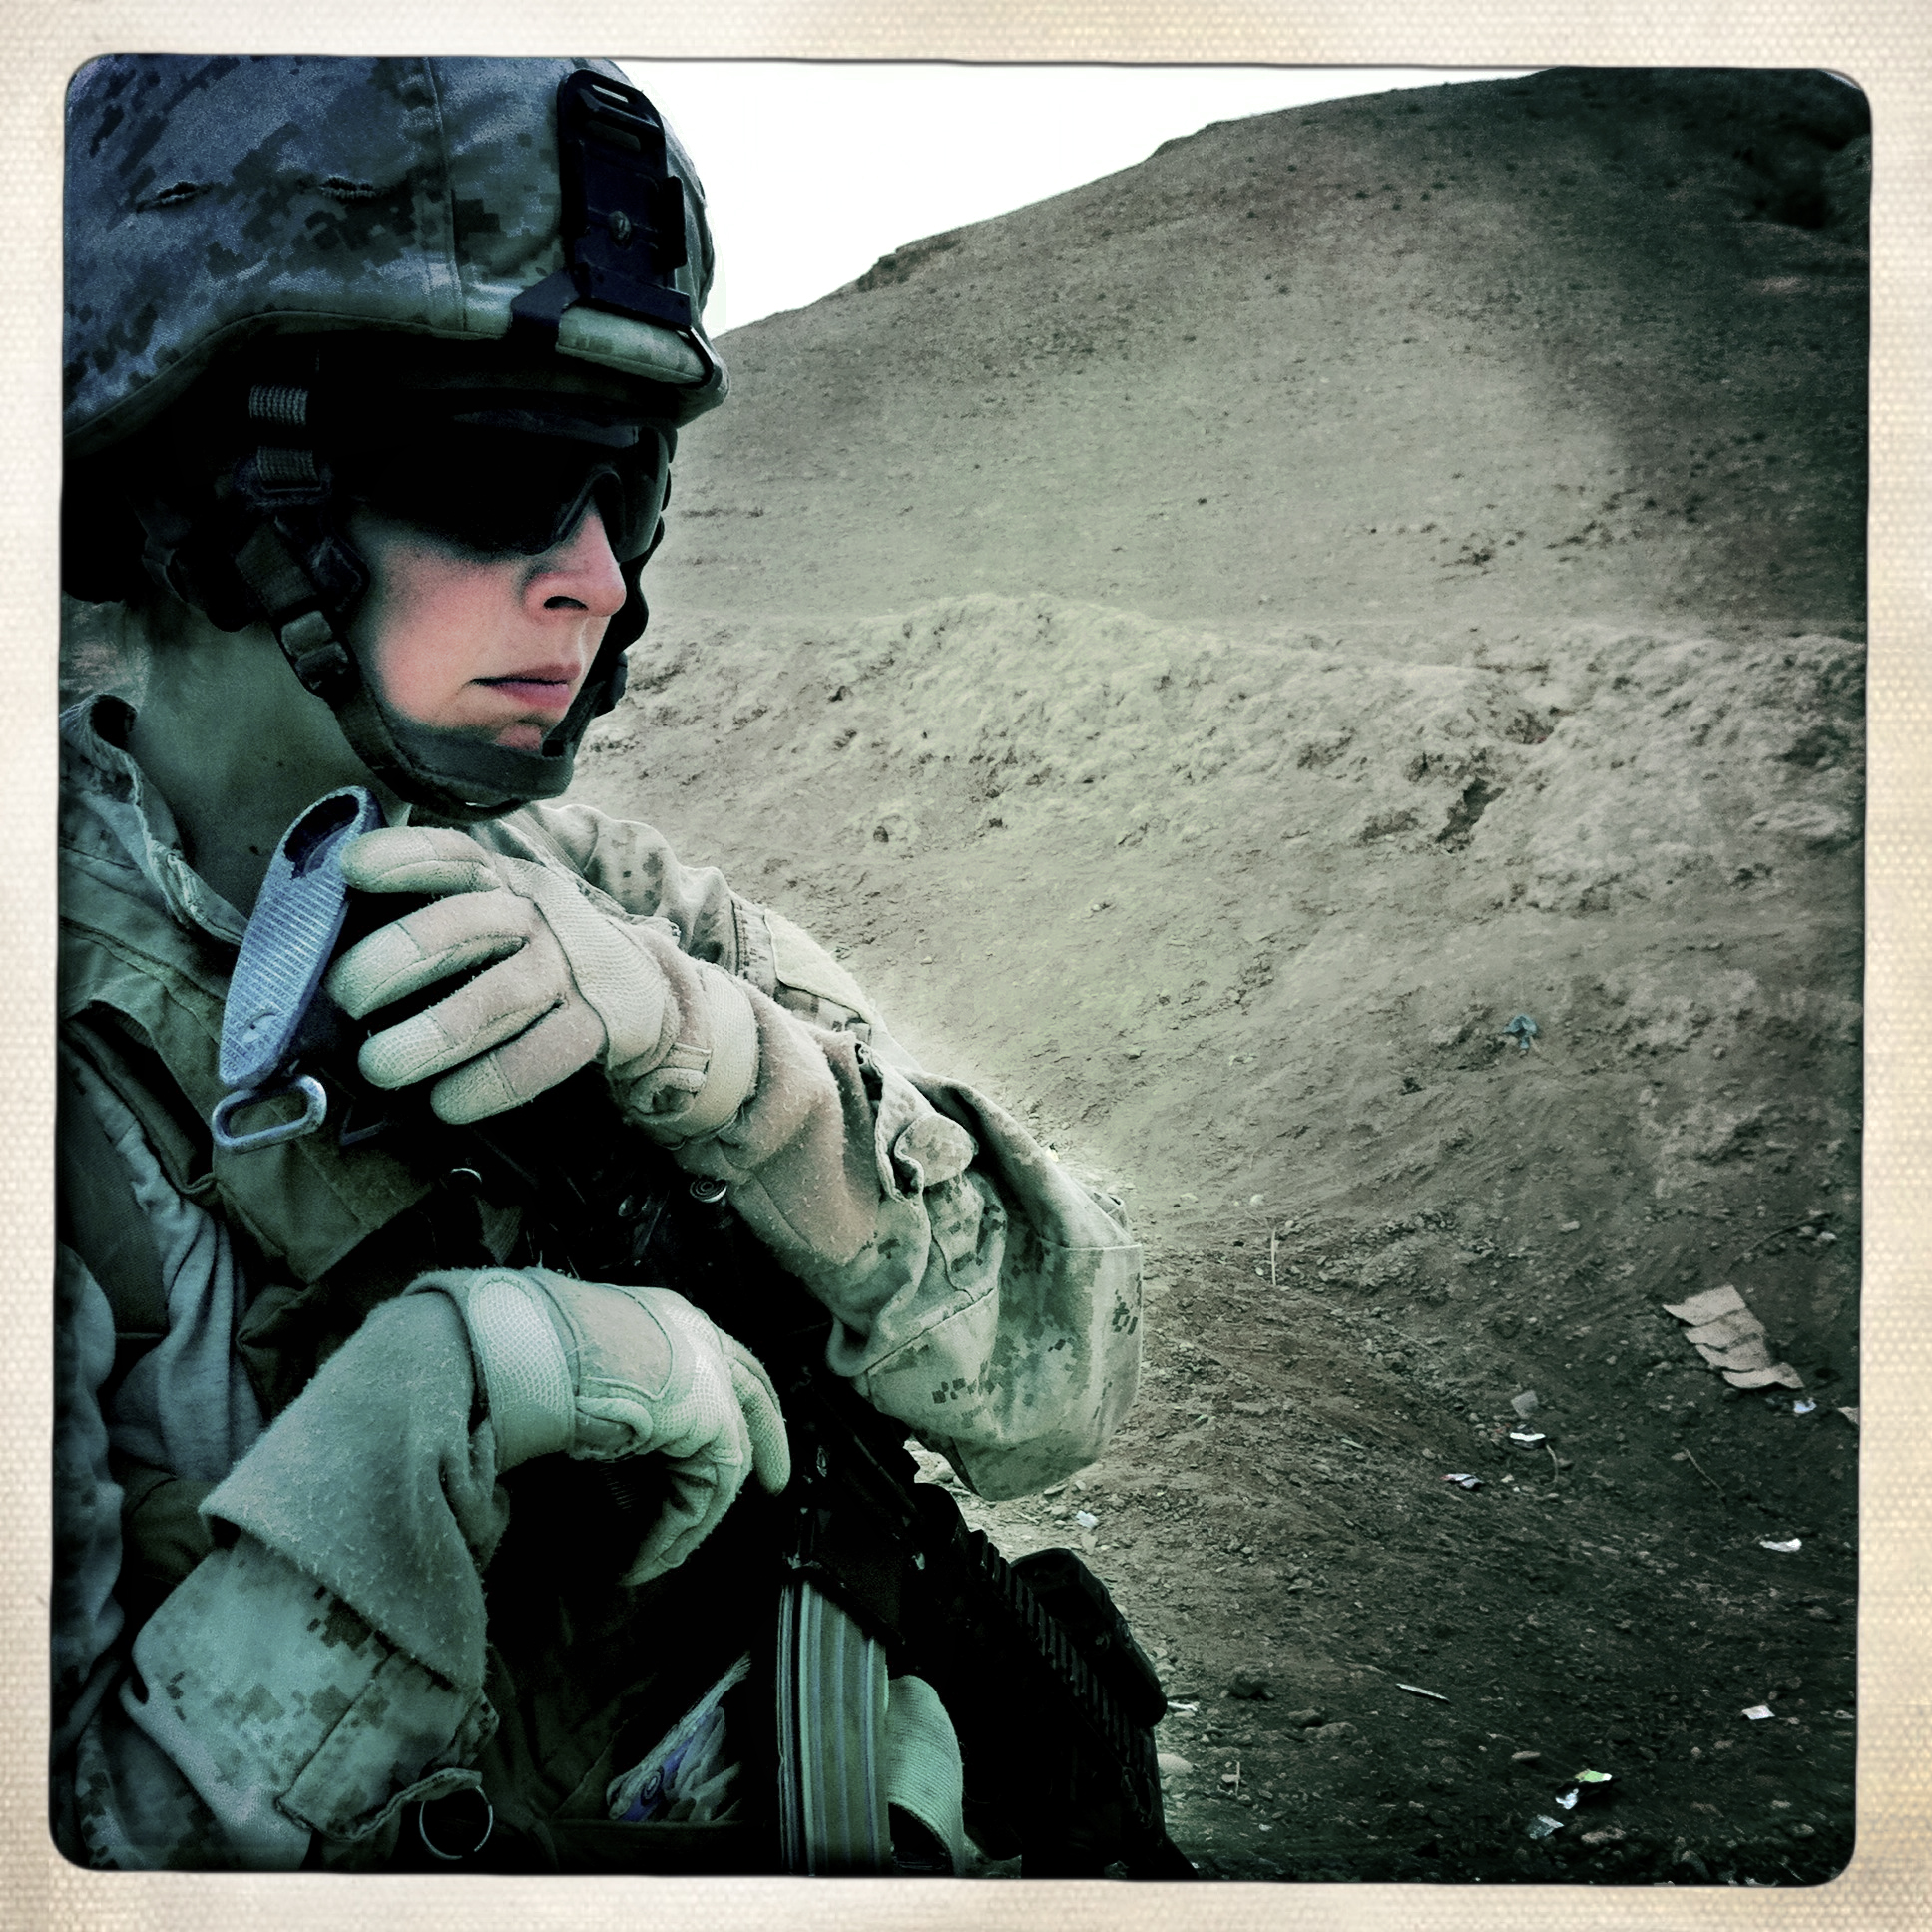 Female Engagement Team member and hospital corpsman Shannon Crowley, 22, of Swampscott, MA on patrol. Attached to 1st Battalion 8th Marines Bravo Company 3rd Platoon. Credit: Rita Leistner, Basetrack, Courtesy of Stephen Bulger Gallery, Afghanistan, 2011.